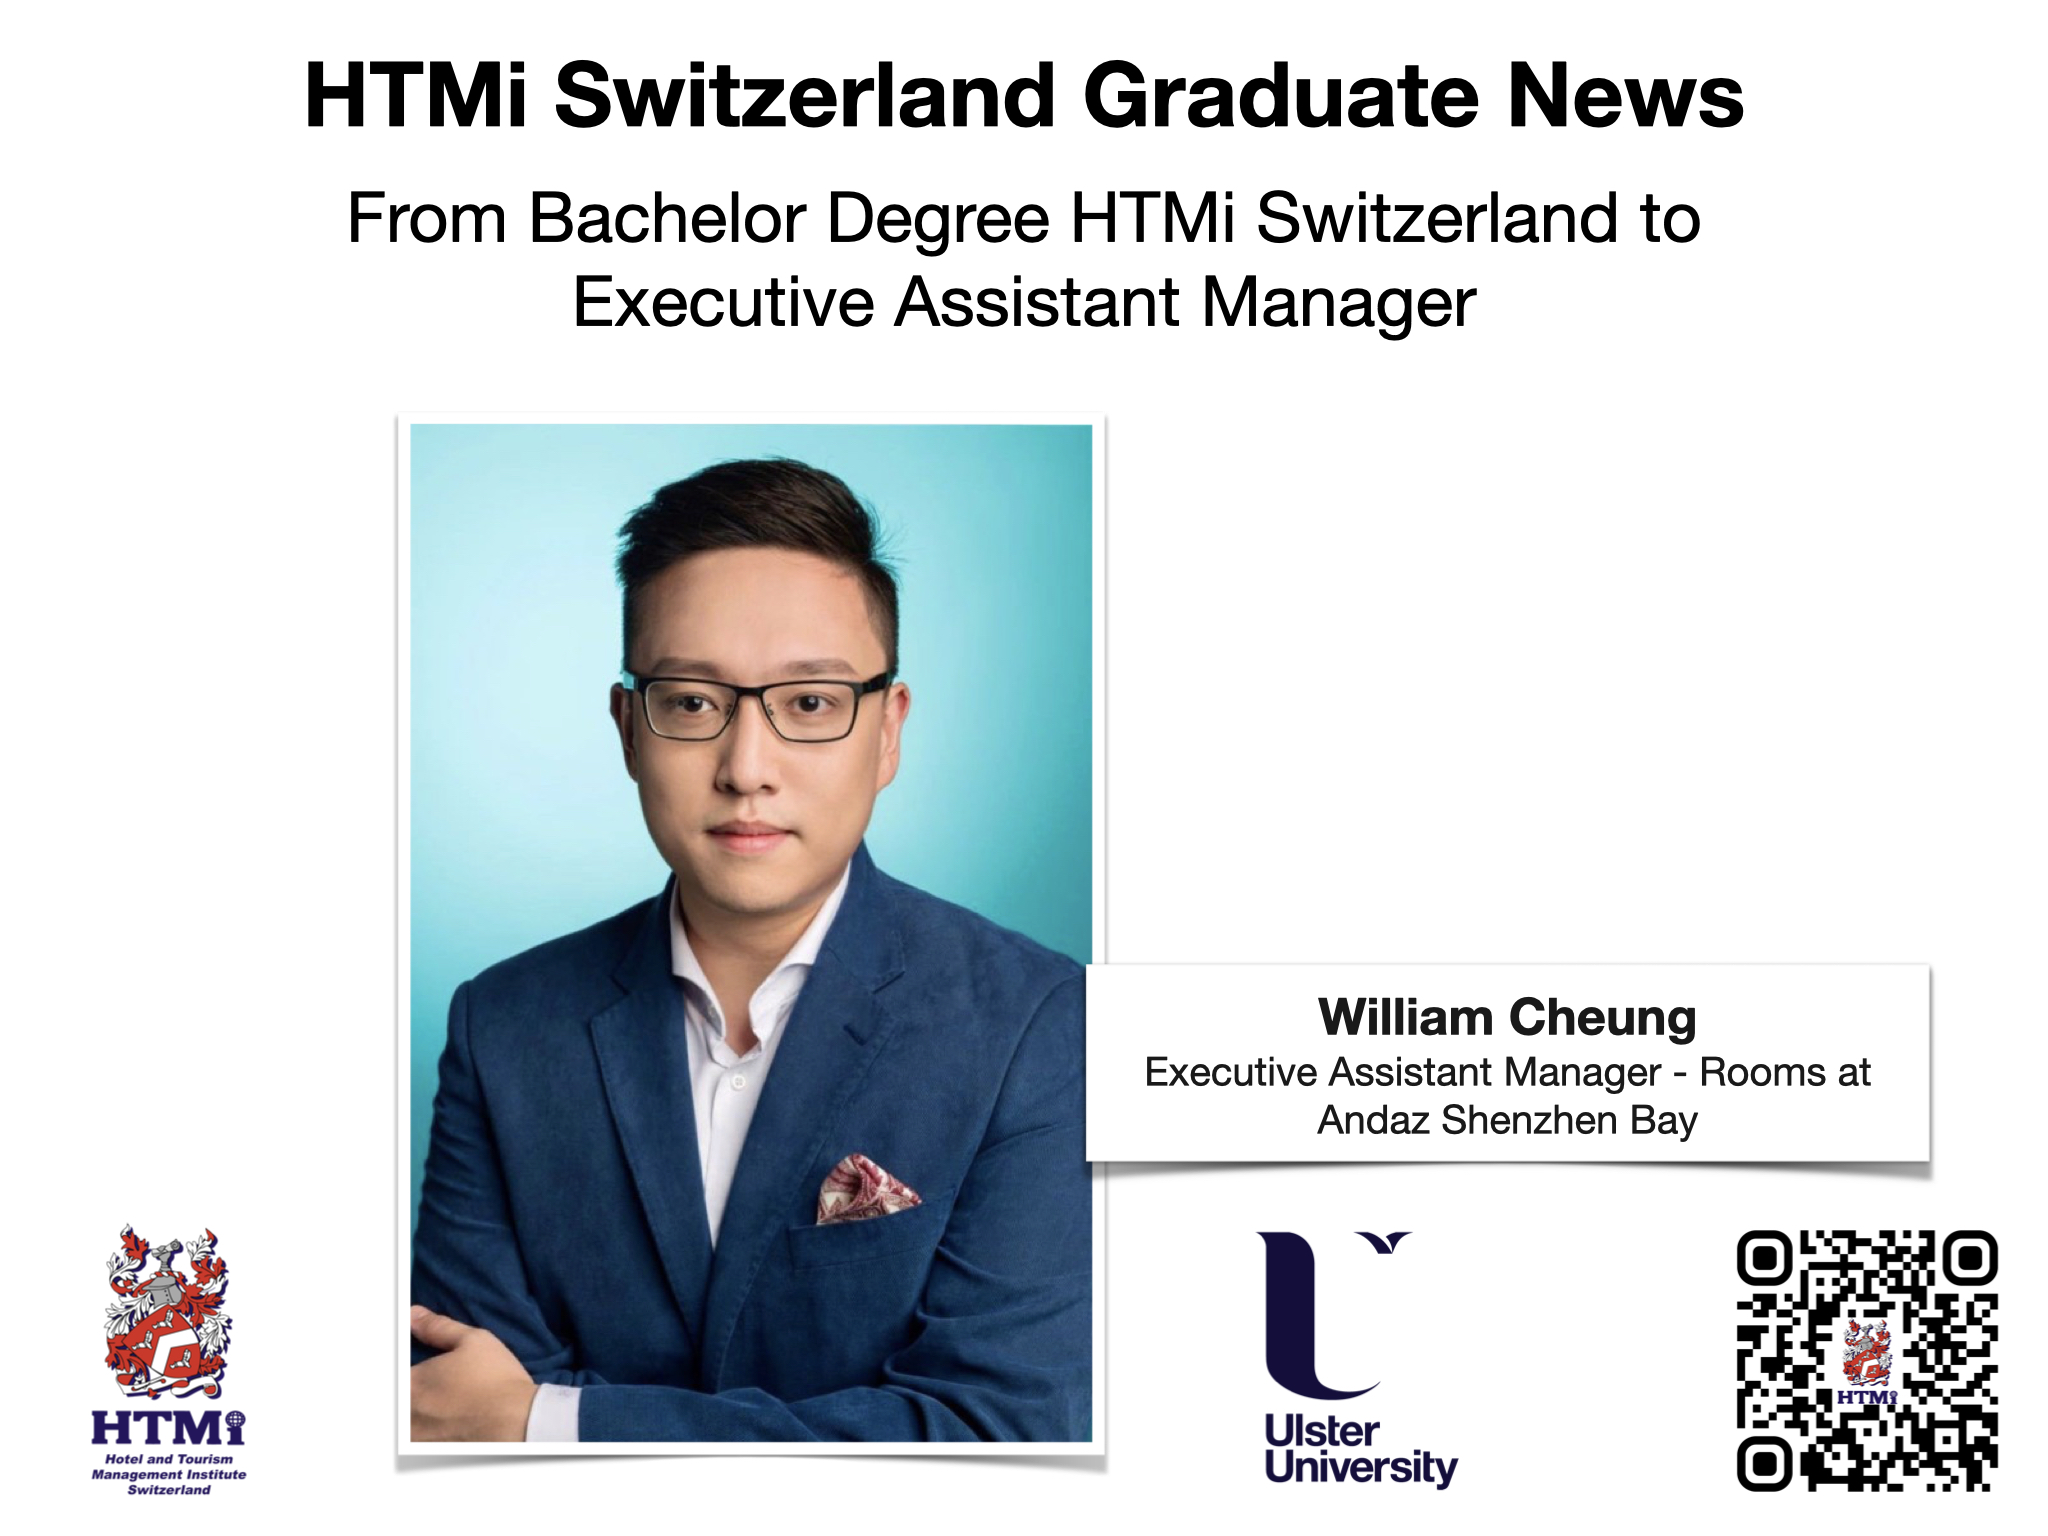 William Cheung - From Bachelor Degree HTMi Switzerland to Executive Assistant Manager - HTMi Switzerland Graduate News